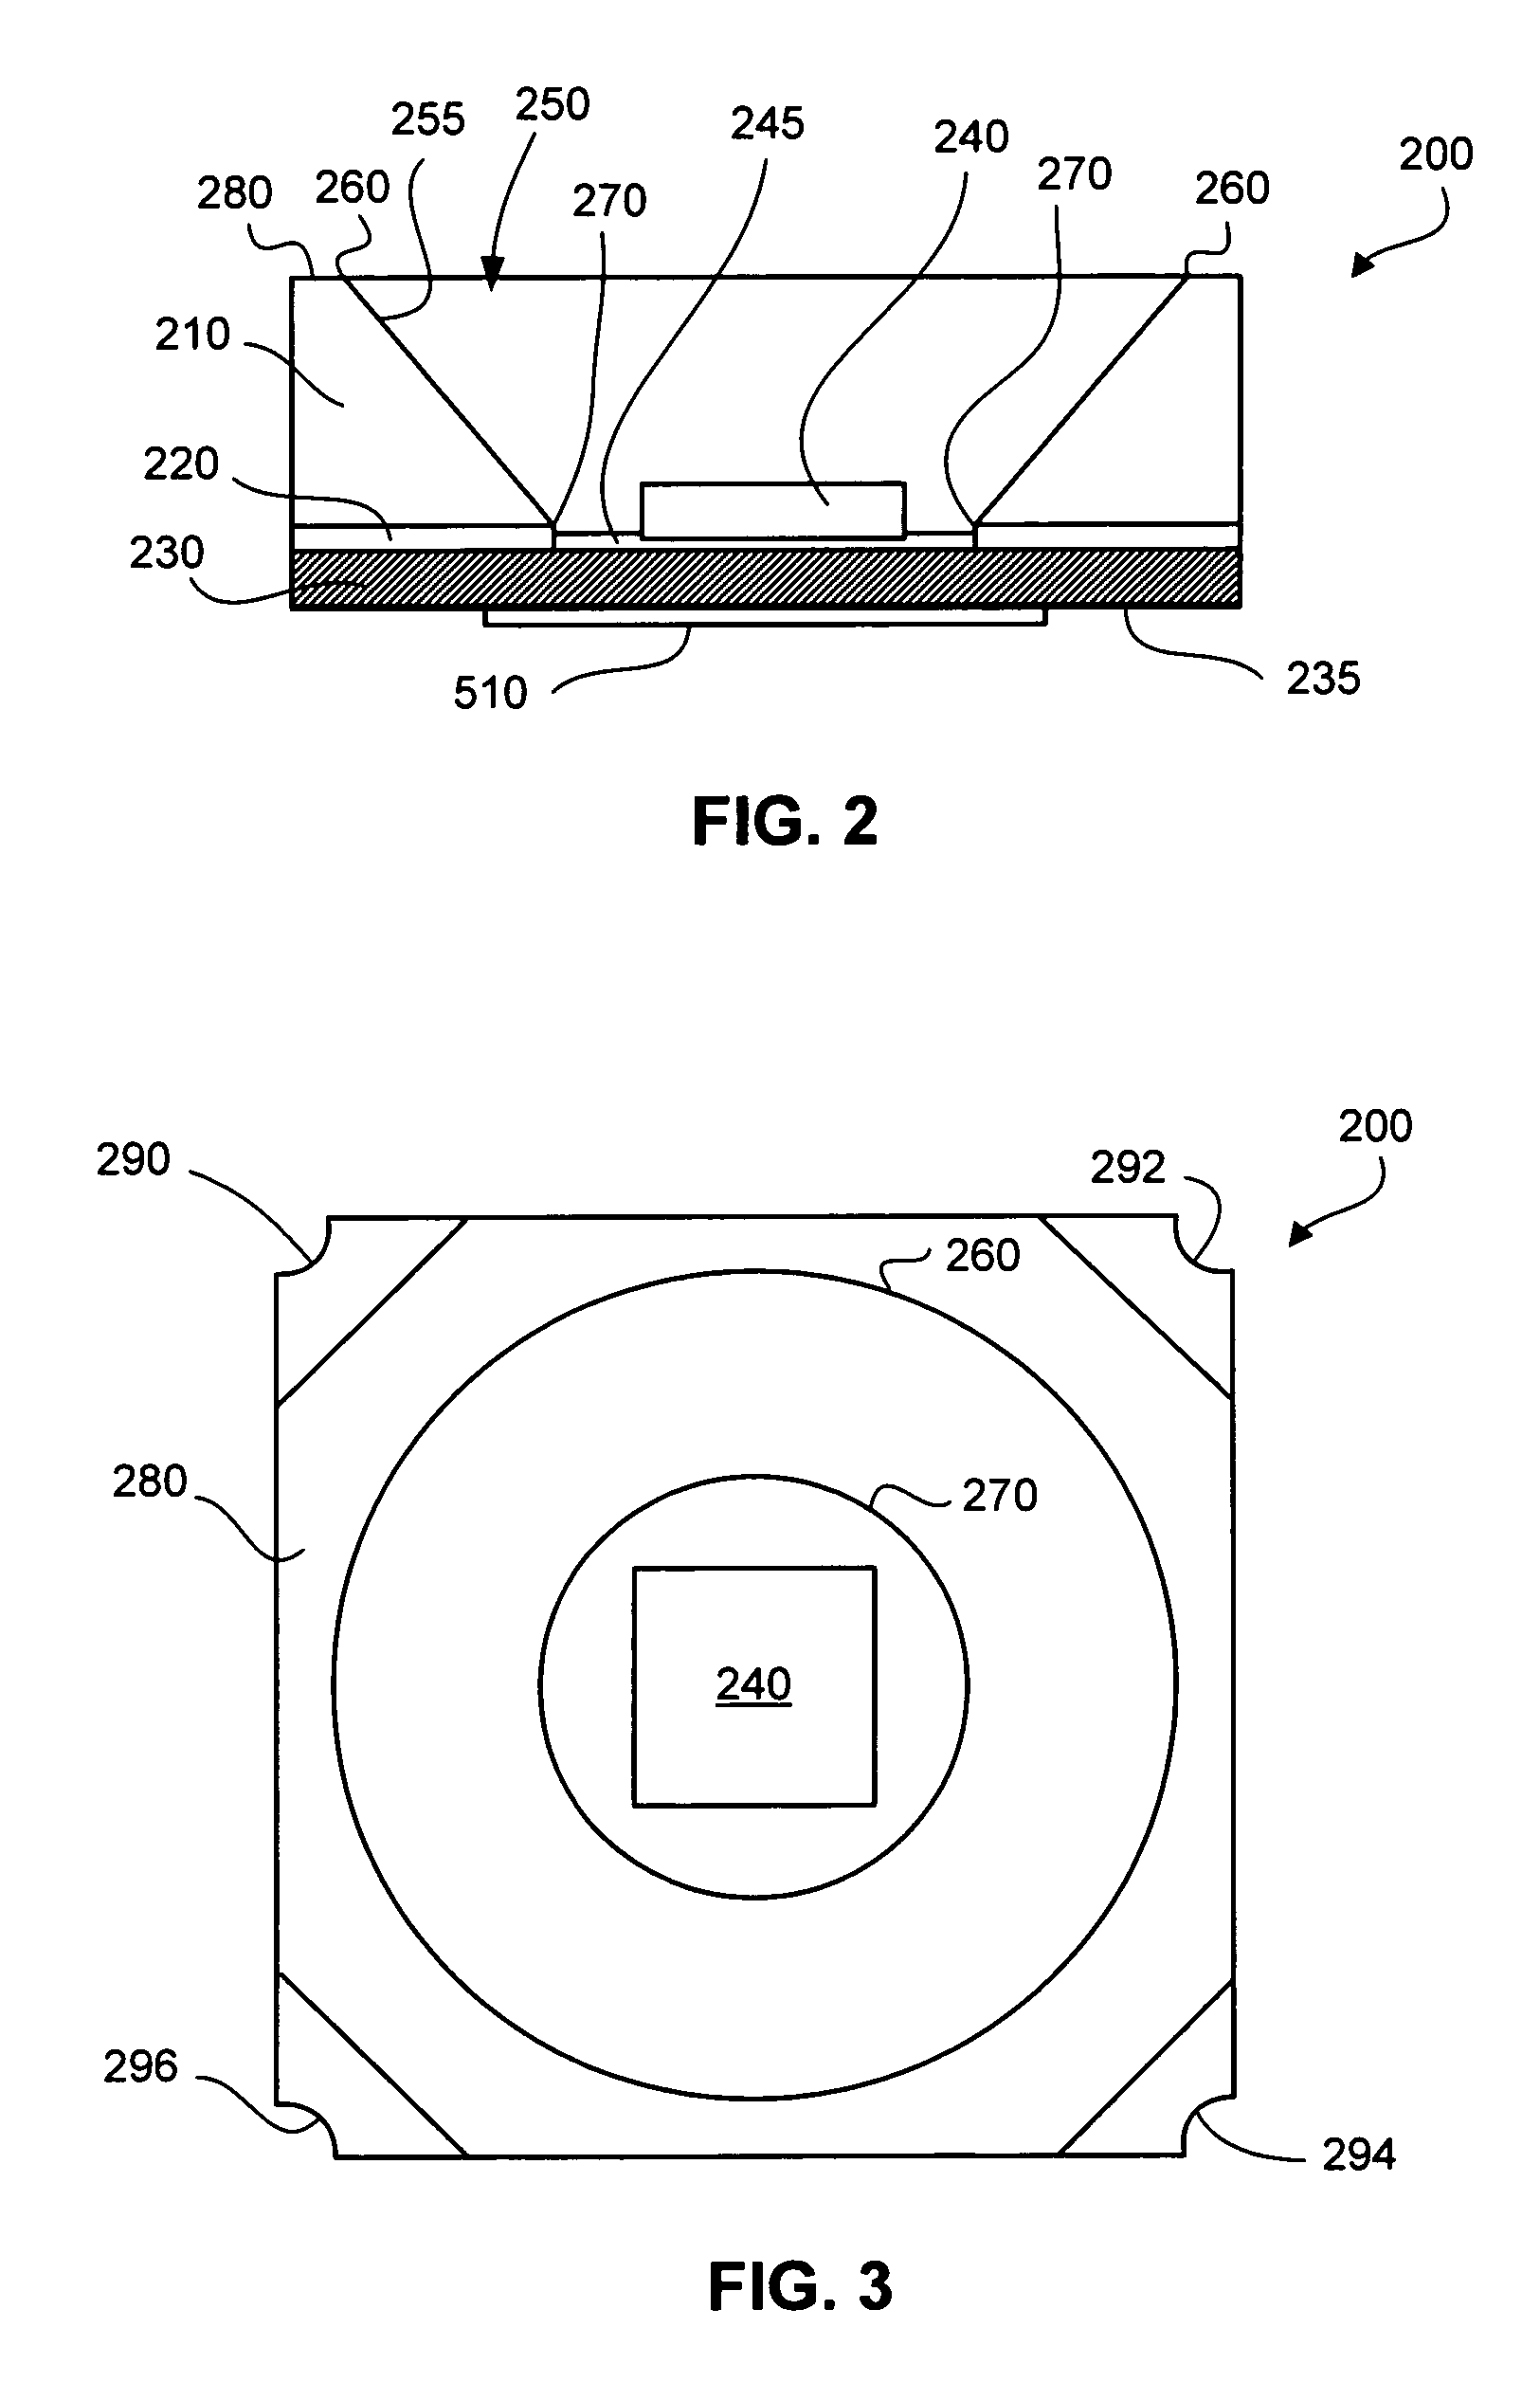 High power LED package with universal bonding pads and interconnect arrangement